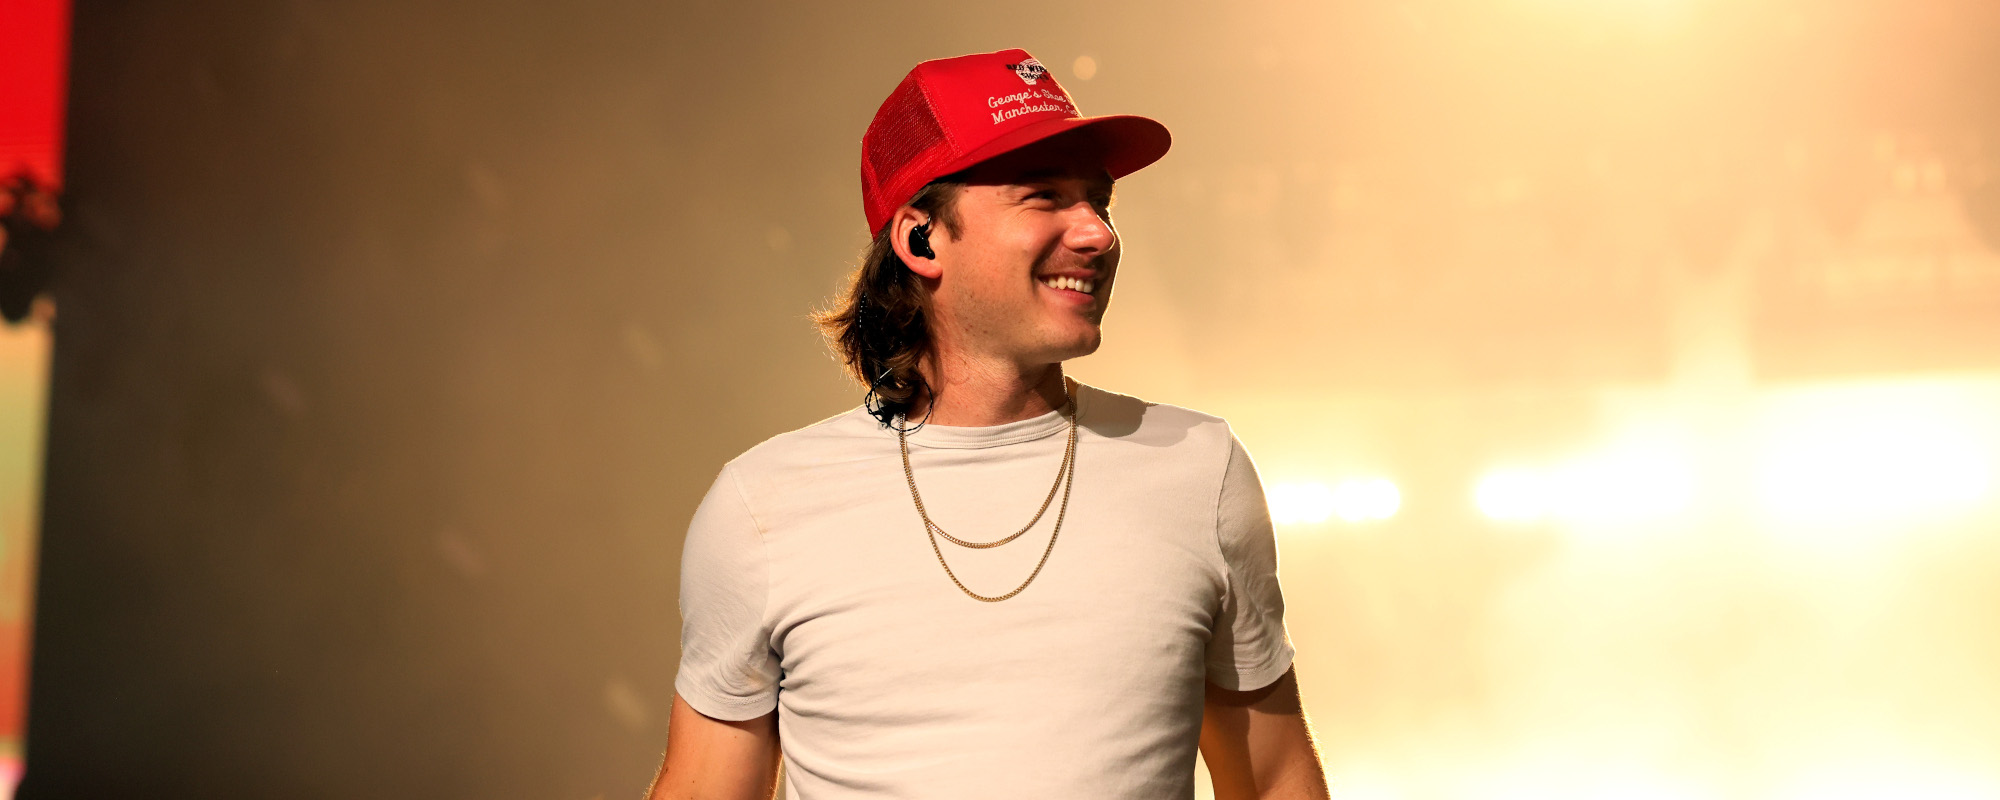 Morgan Wallen Launches His Own Iced Tea with ‘Ryl Tea’